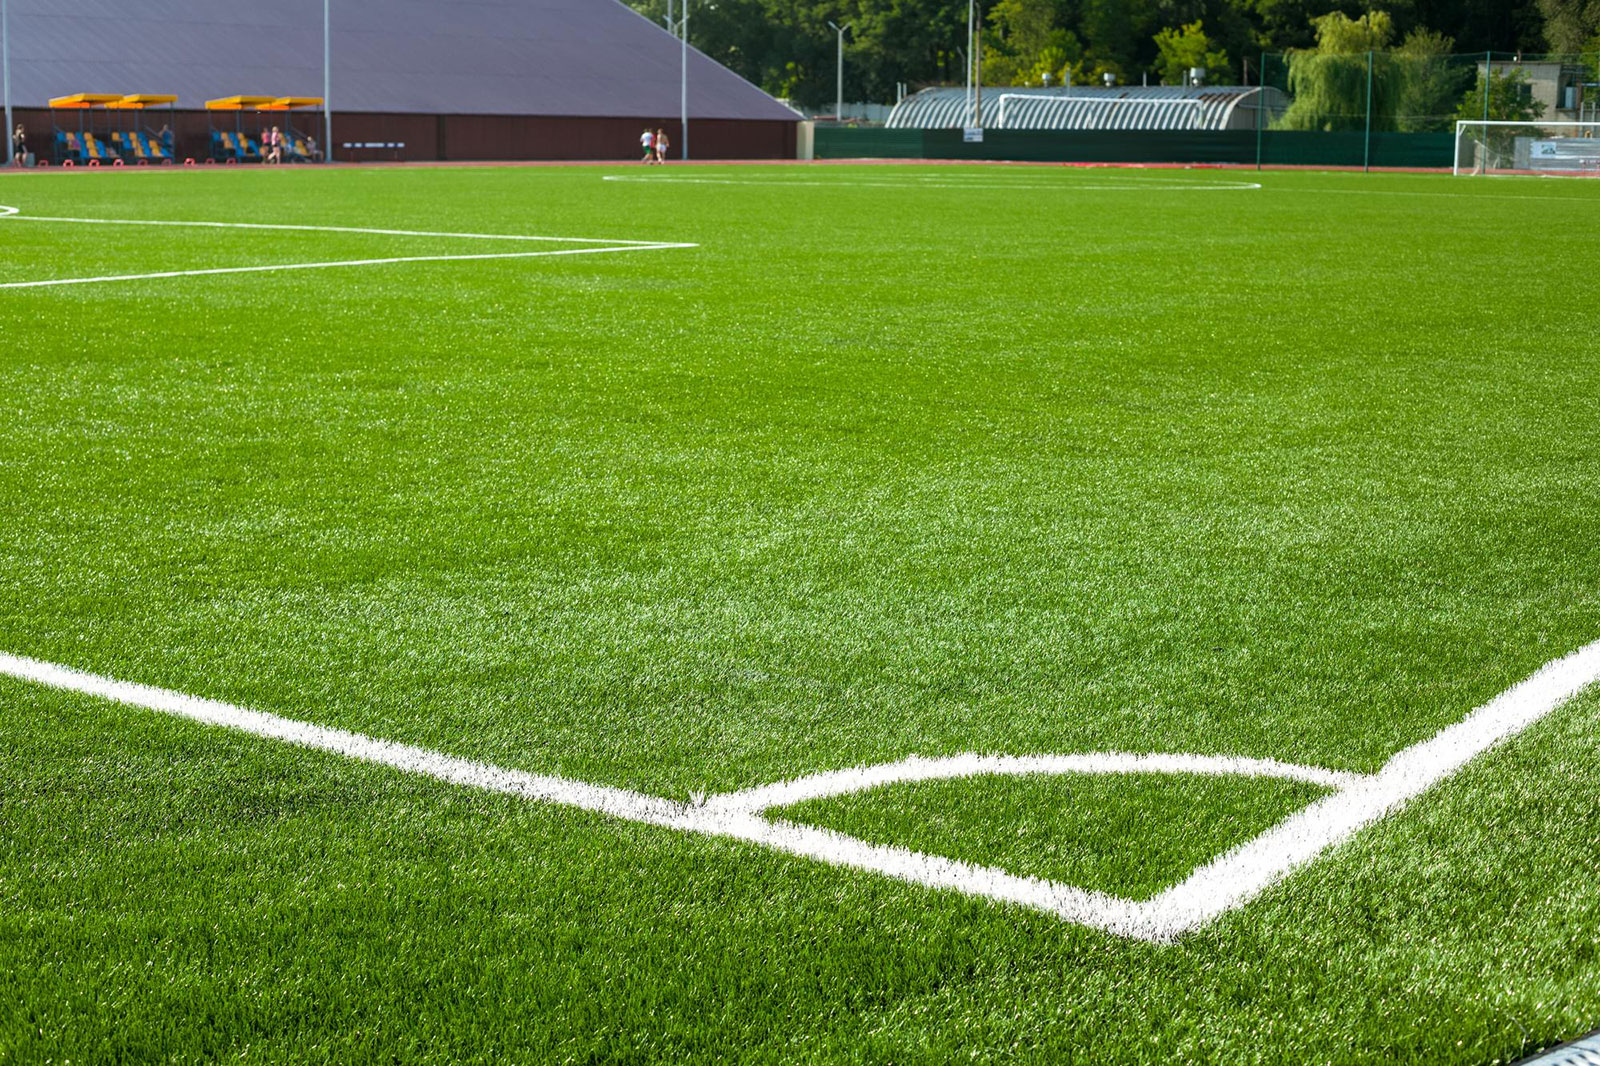 High-quality sports turf management for optimal performance and durability